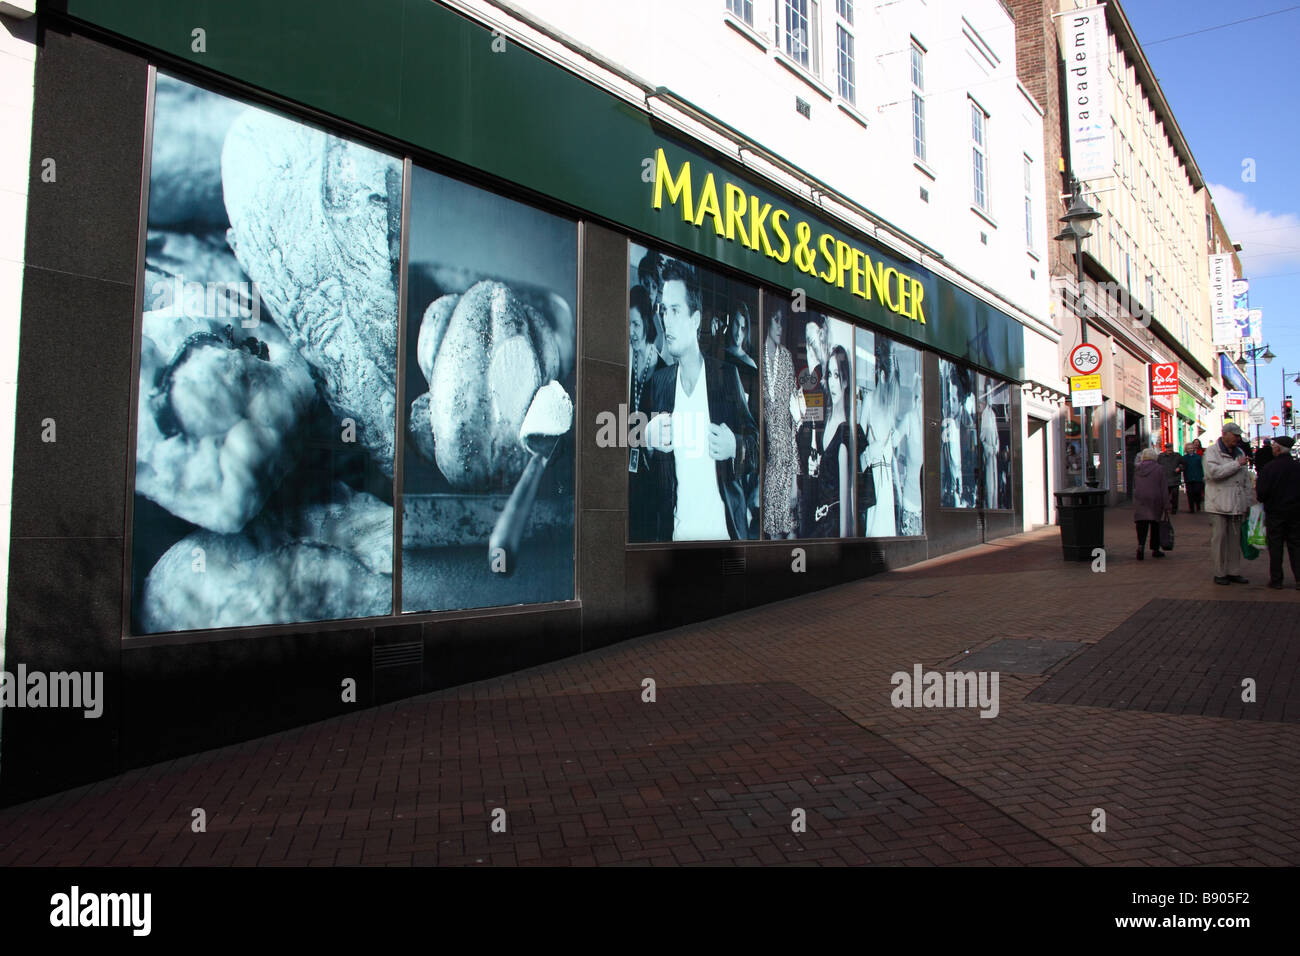 Marks and spencers shop front in mansfield Stock Photo